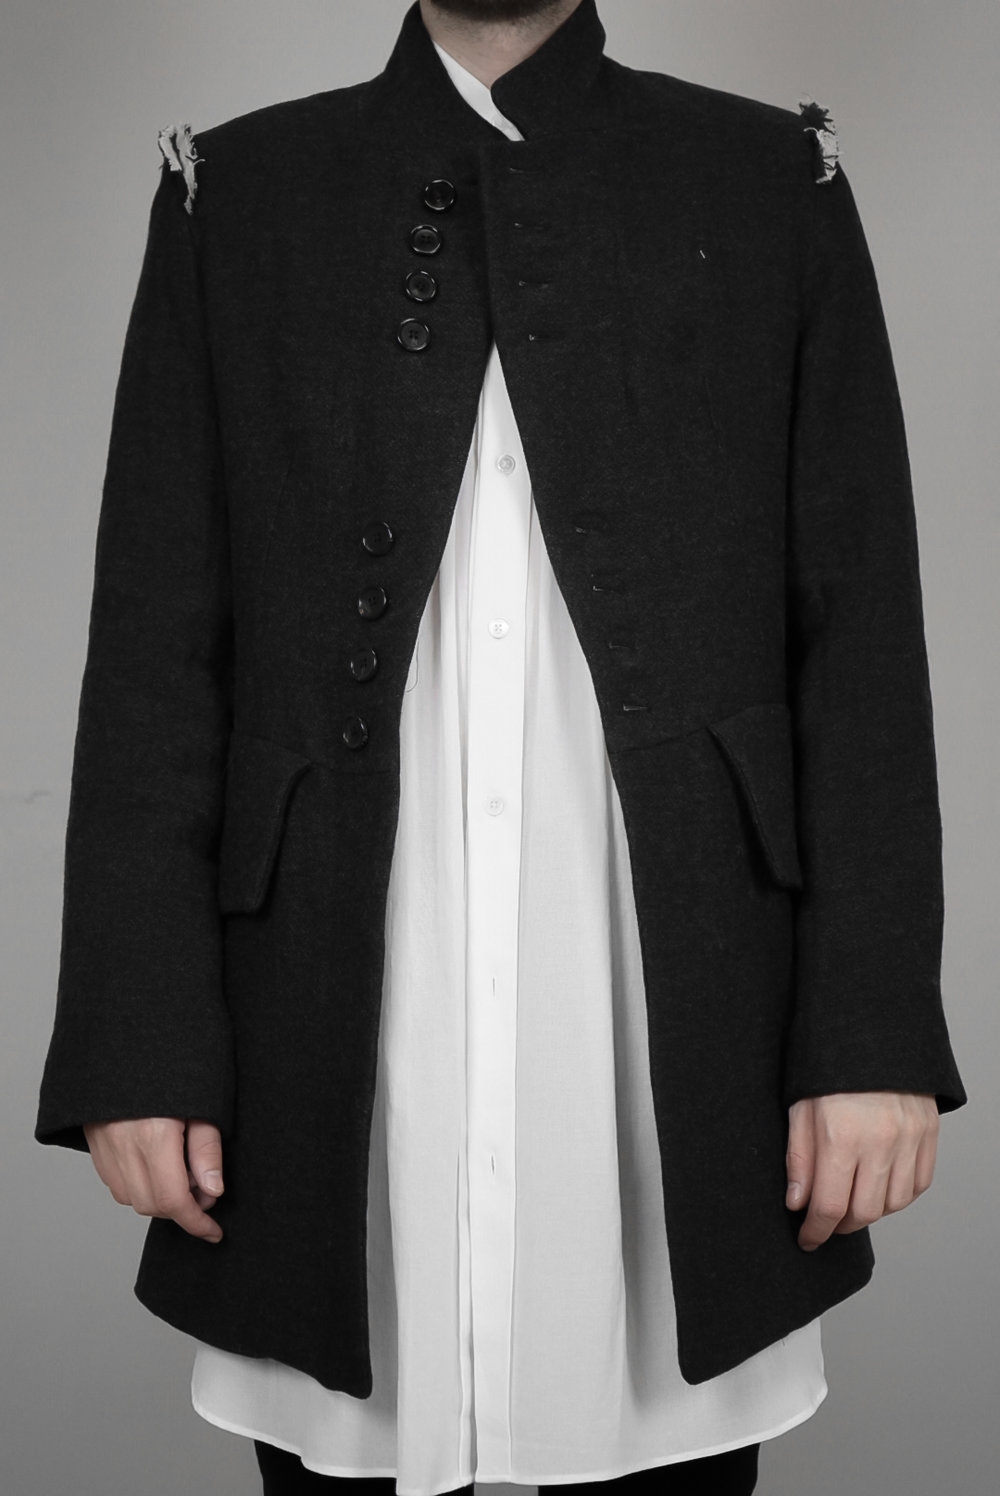 Ann Demeulemeester – Mens – Deconstructed Coat – Grey – Single Breasted – Linen / Wool / Cotton – Front Button Closing